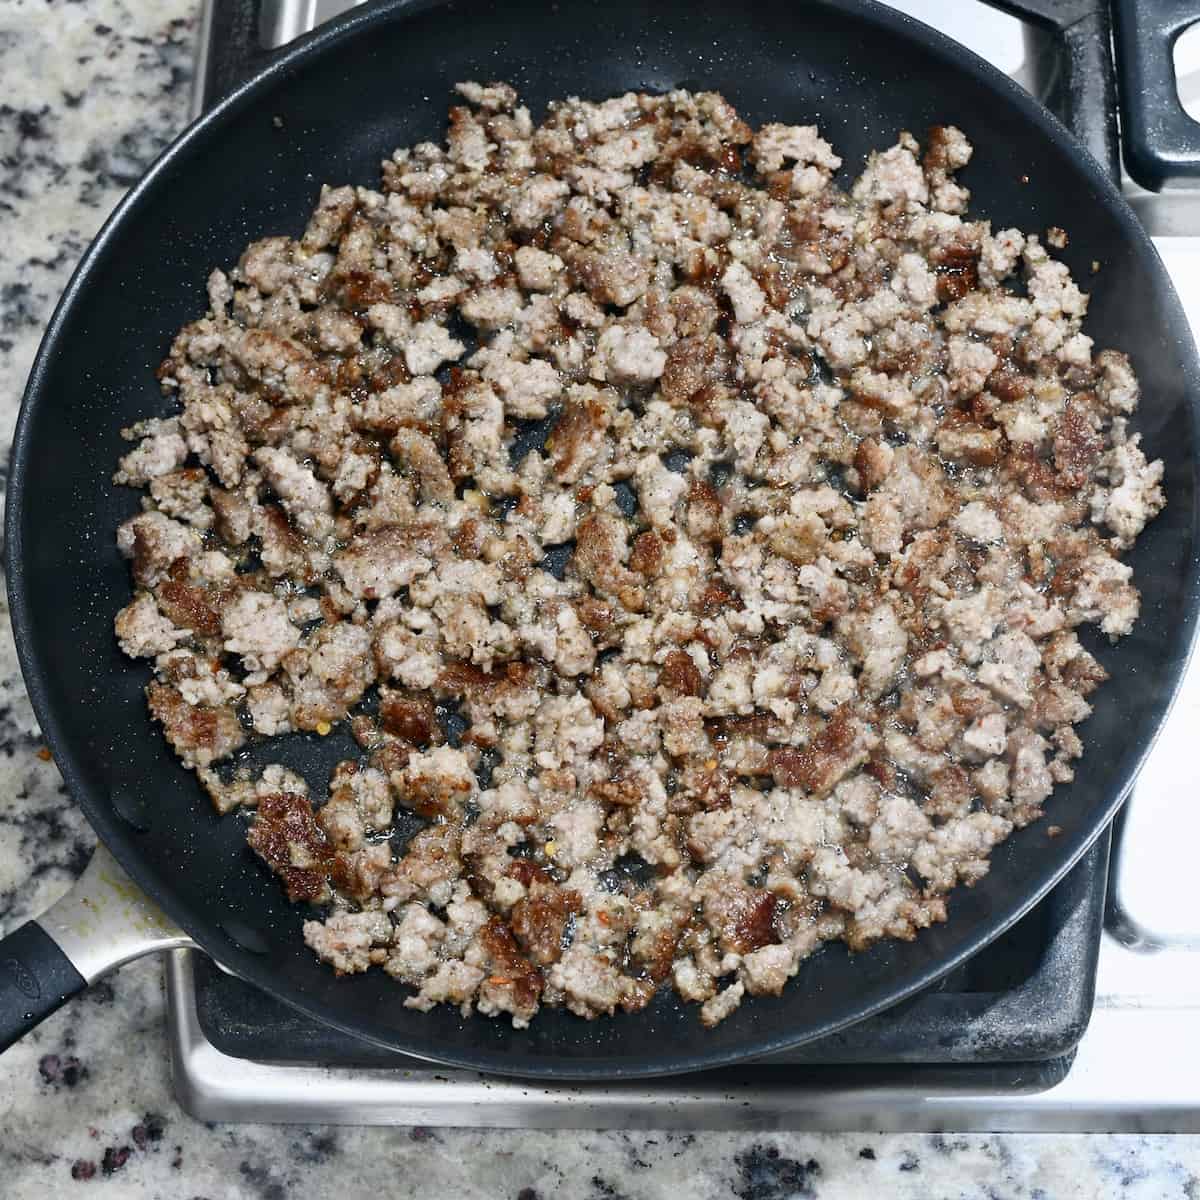 Browning ground sausage in a skillet.